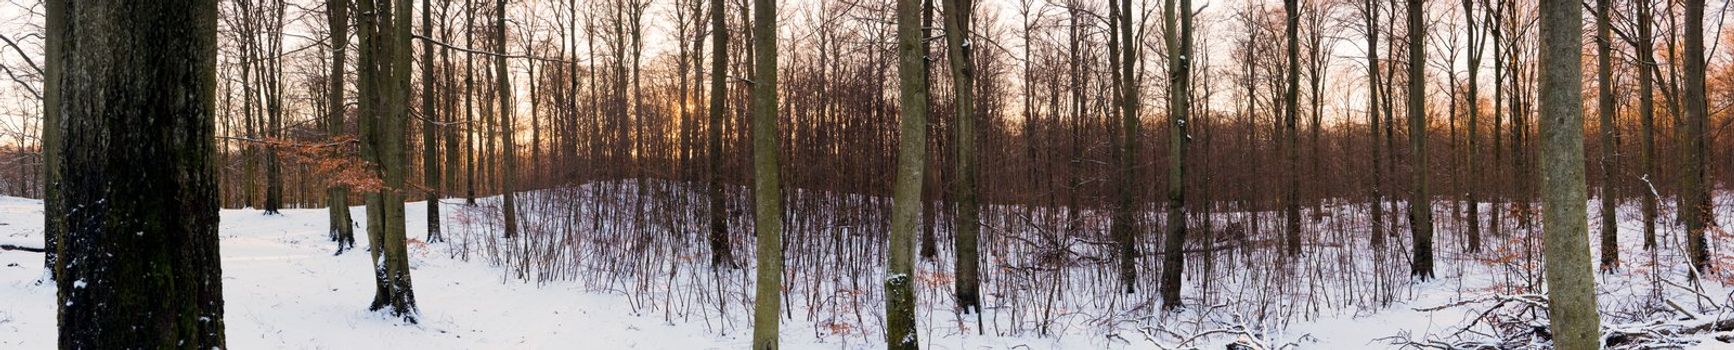 High-resolution panoramic view of a forest in winter